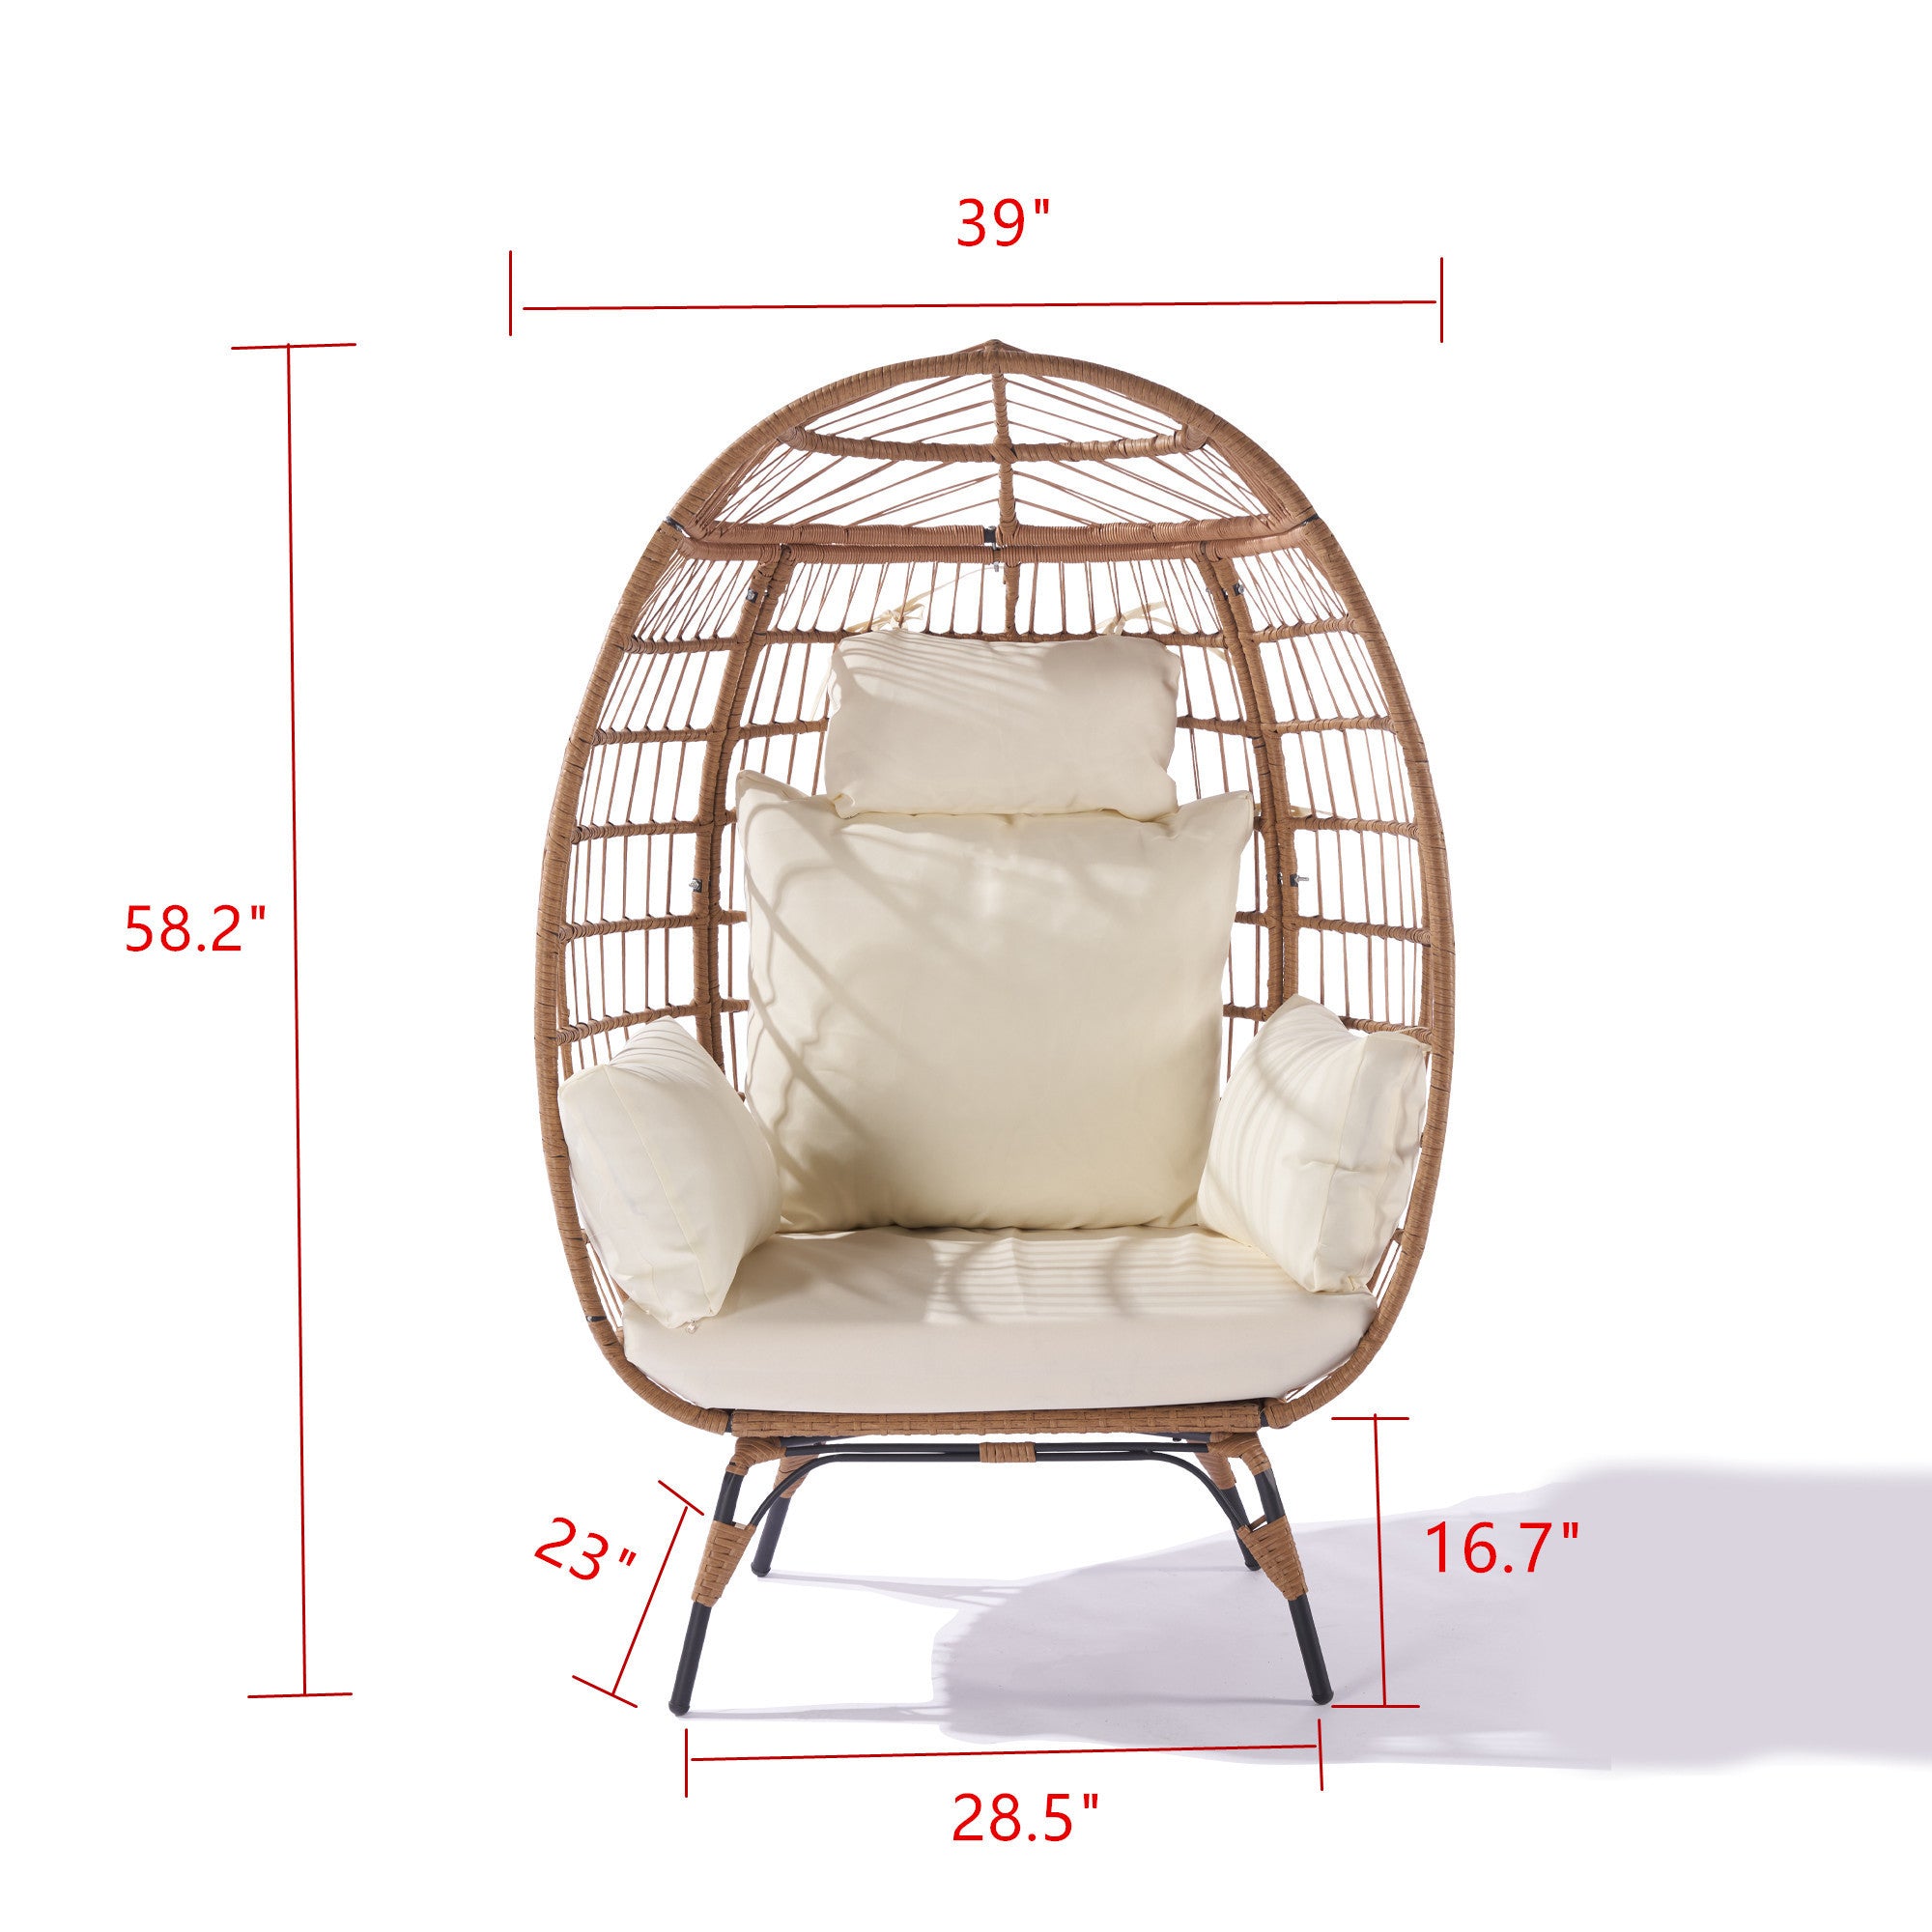 Wicker Egg Chair, Oversized Indoor Outdoor Lounger for Patio, Backyard, Living Room w/ 5 Cushions, Steel Frame,\